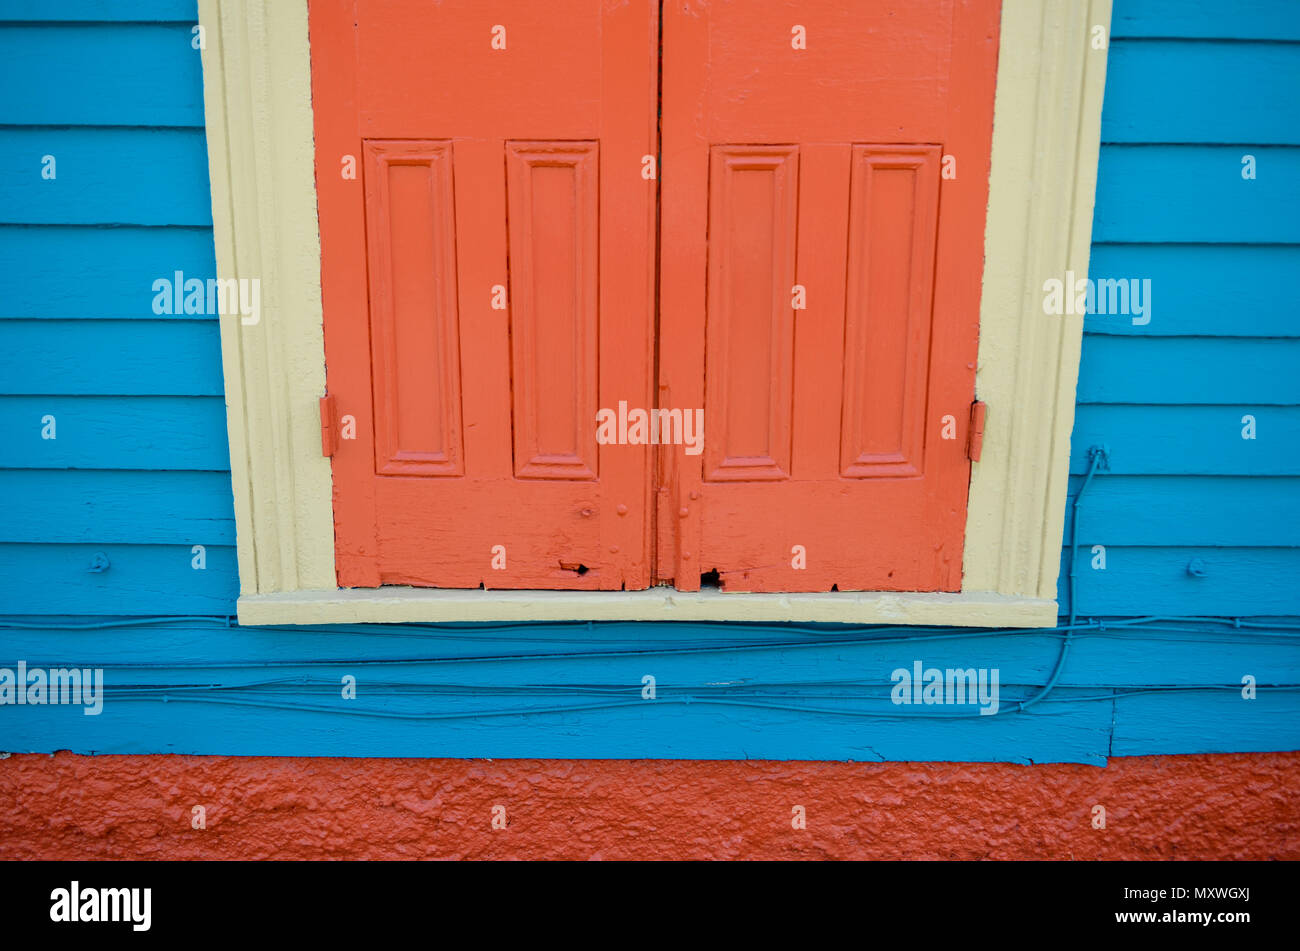 Various colors, textures and architecture around New Orleans, Louisiana Stock Photo